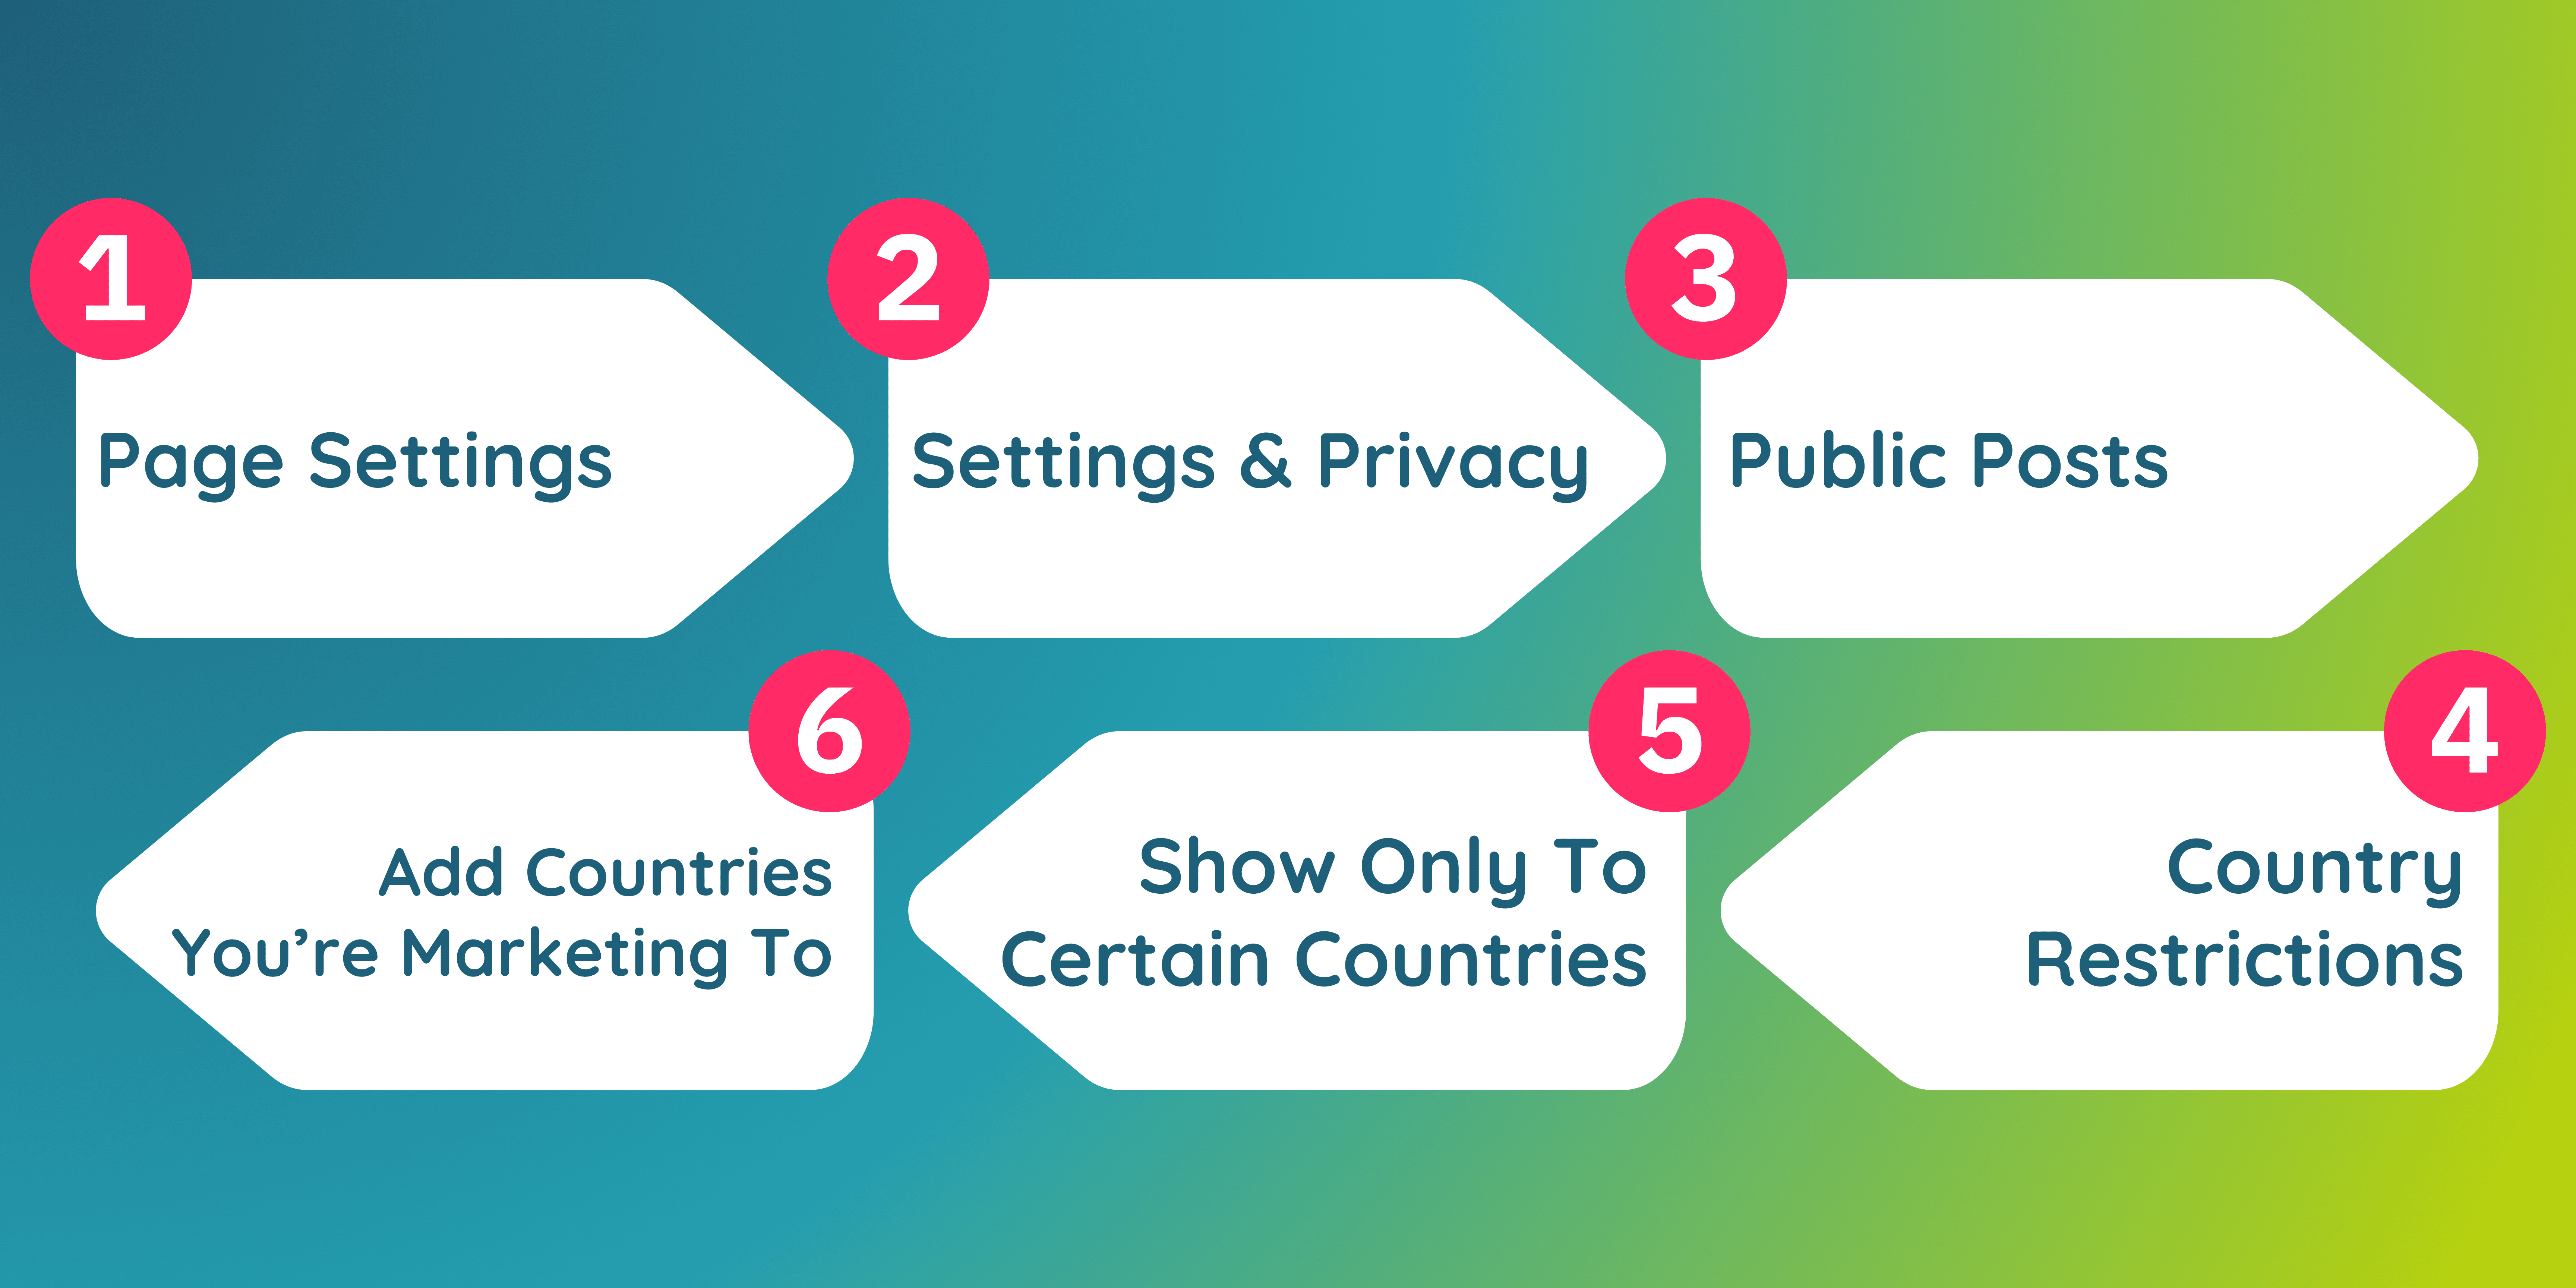 Steps to restrict countries on Facebook